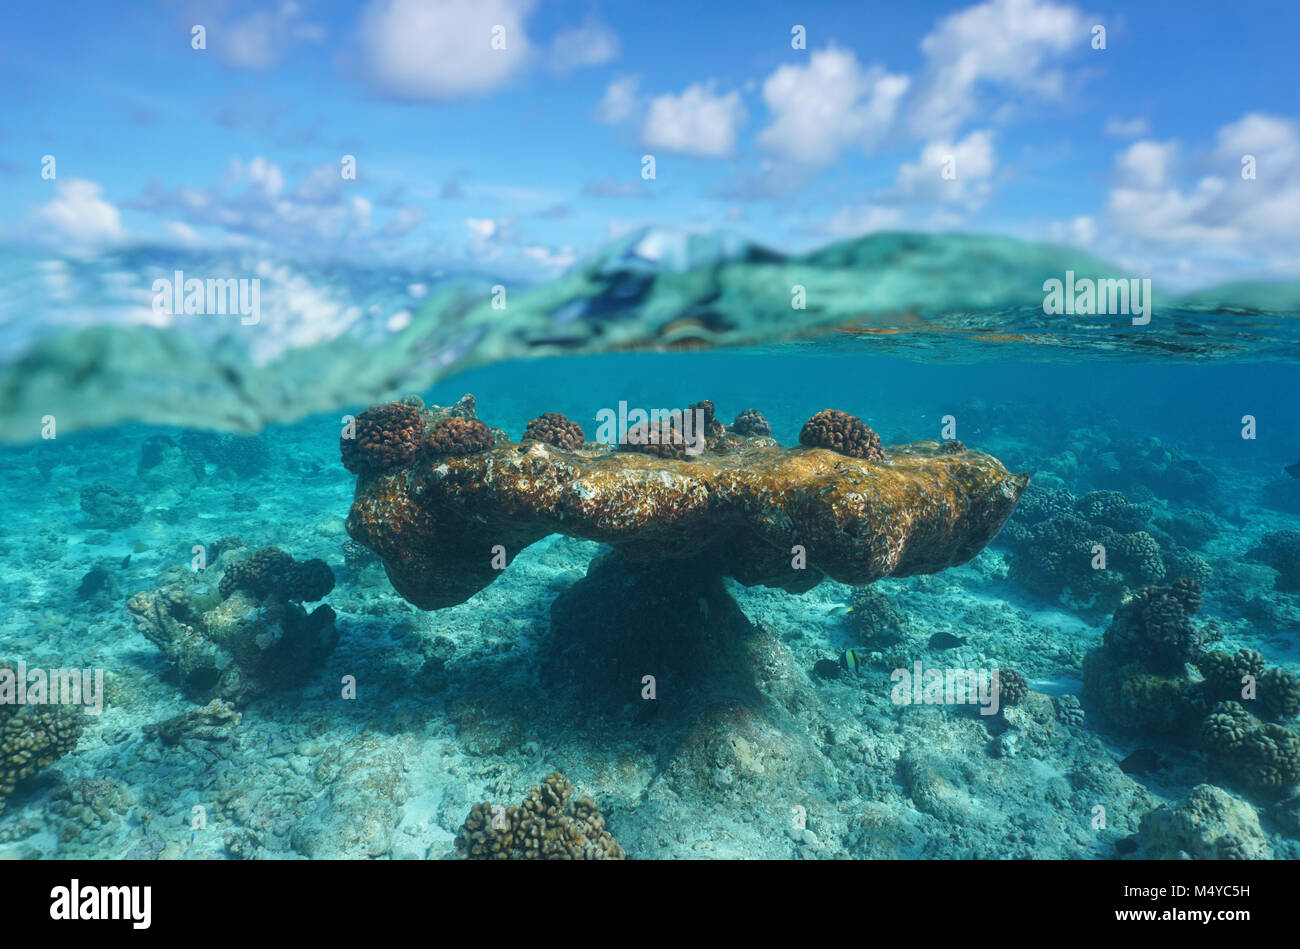 Cloudy blue sky and natural reef formation underwater, split view above and below water surface, Rangiroa, Tuamotus, Pacific ocean, French Polynesia Stock Photo